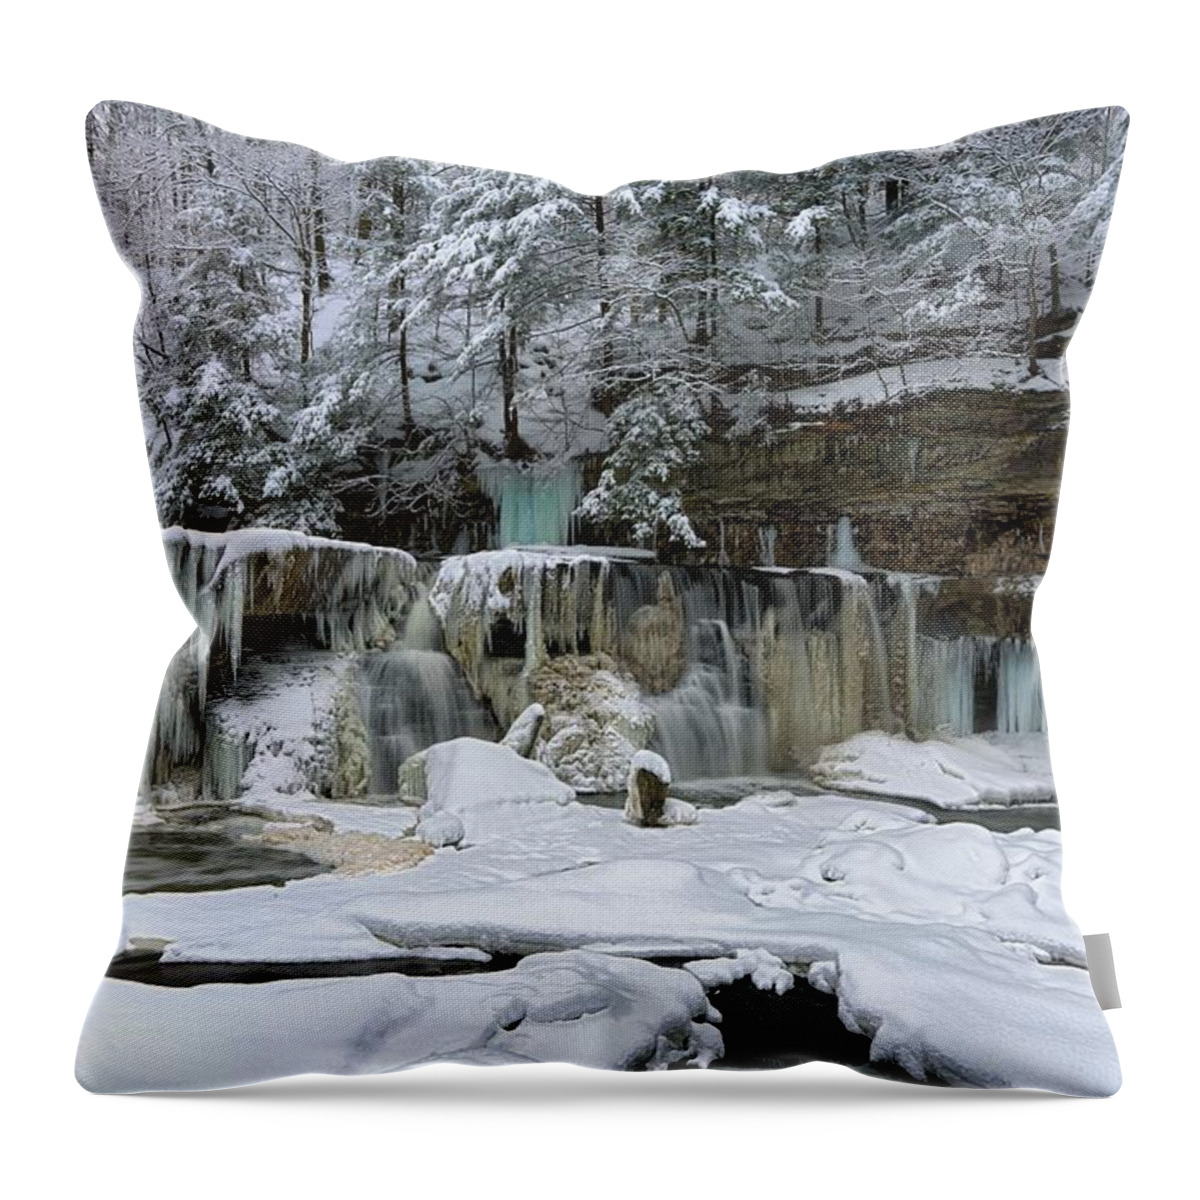 Great Falls Throw Pillow featuring the photograph Frozen In Time #2 by Daniel Behm